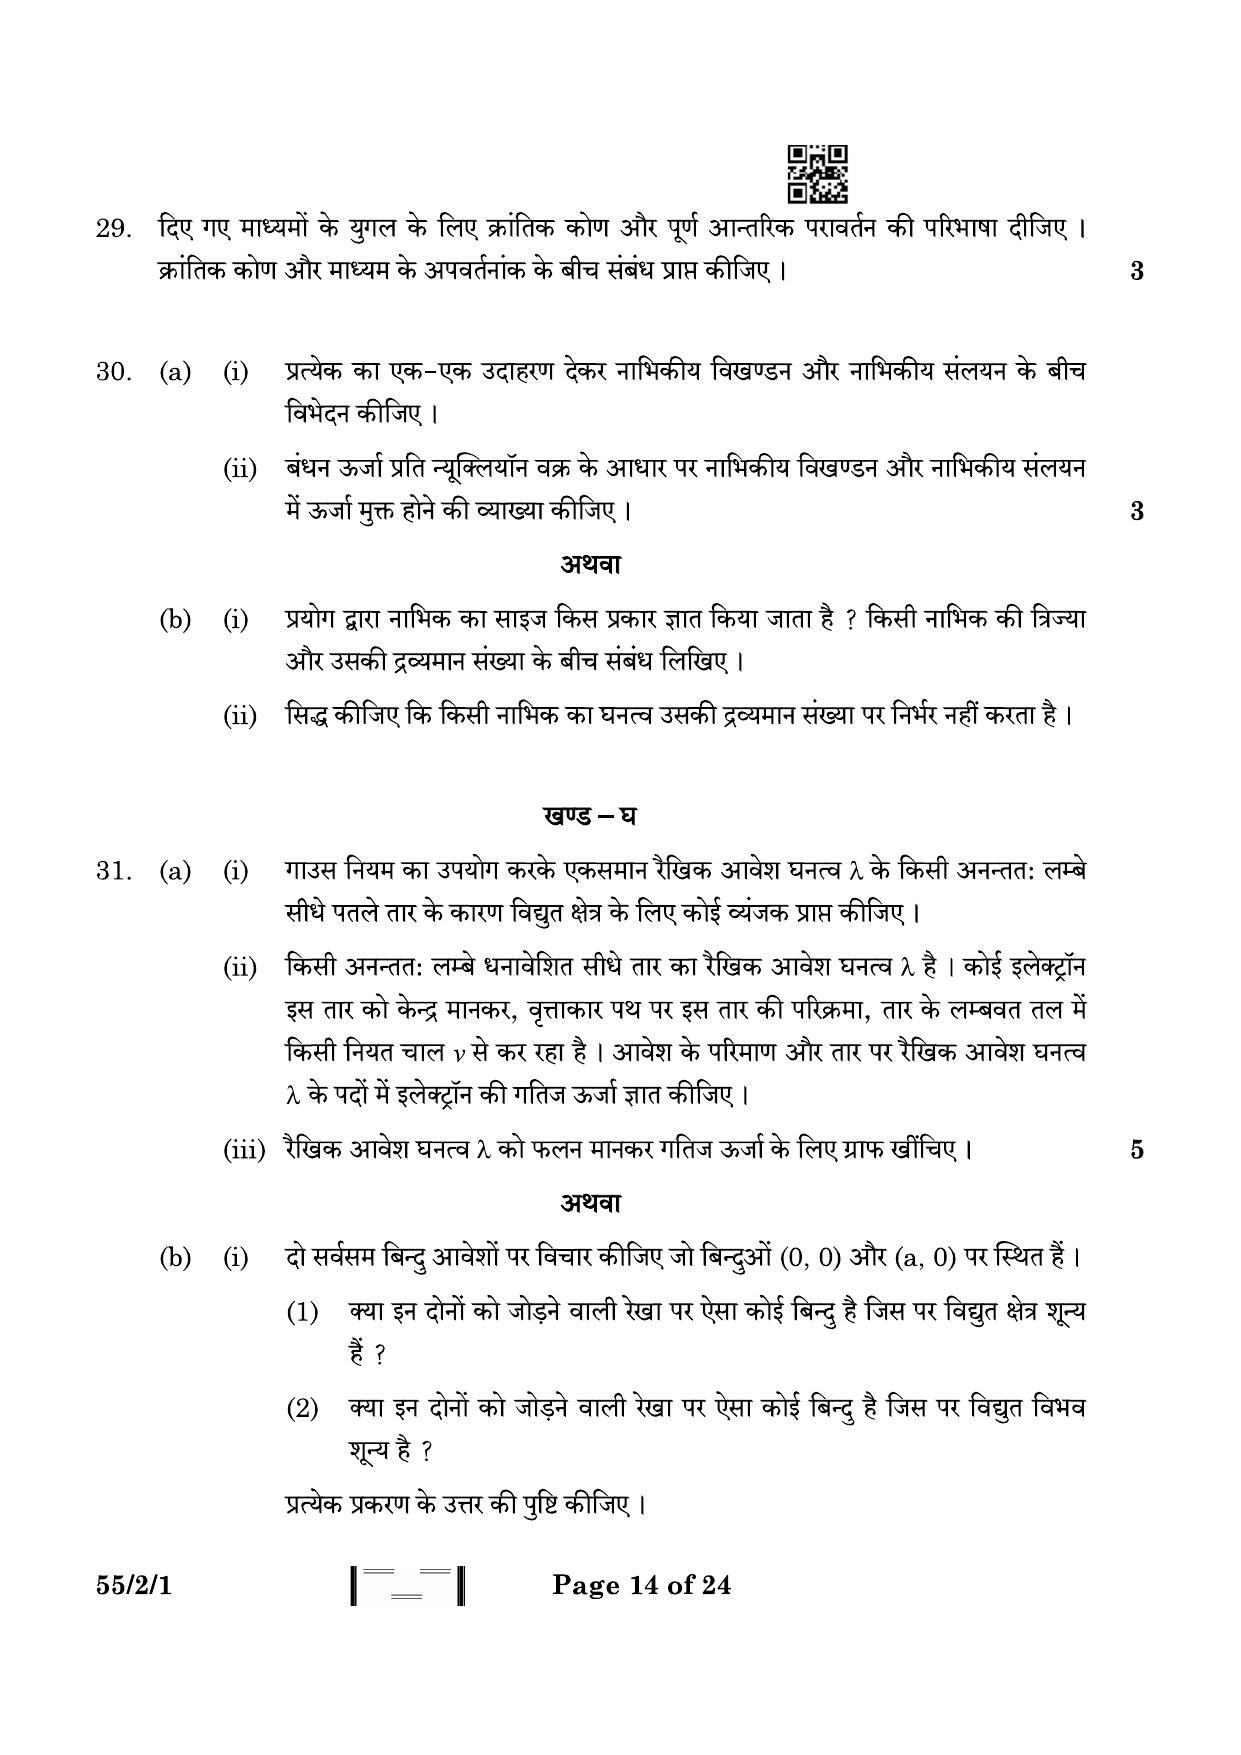 CBSE Class 12 55-2-1 Physics 2023 Question Paper - Page 14